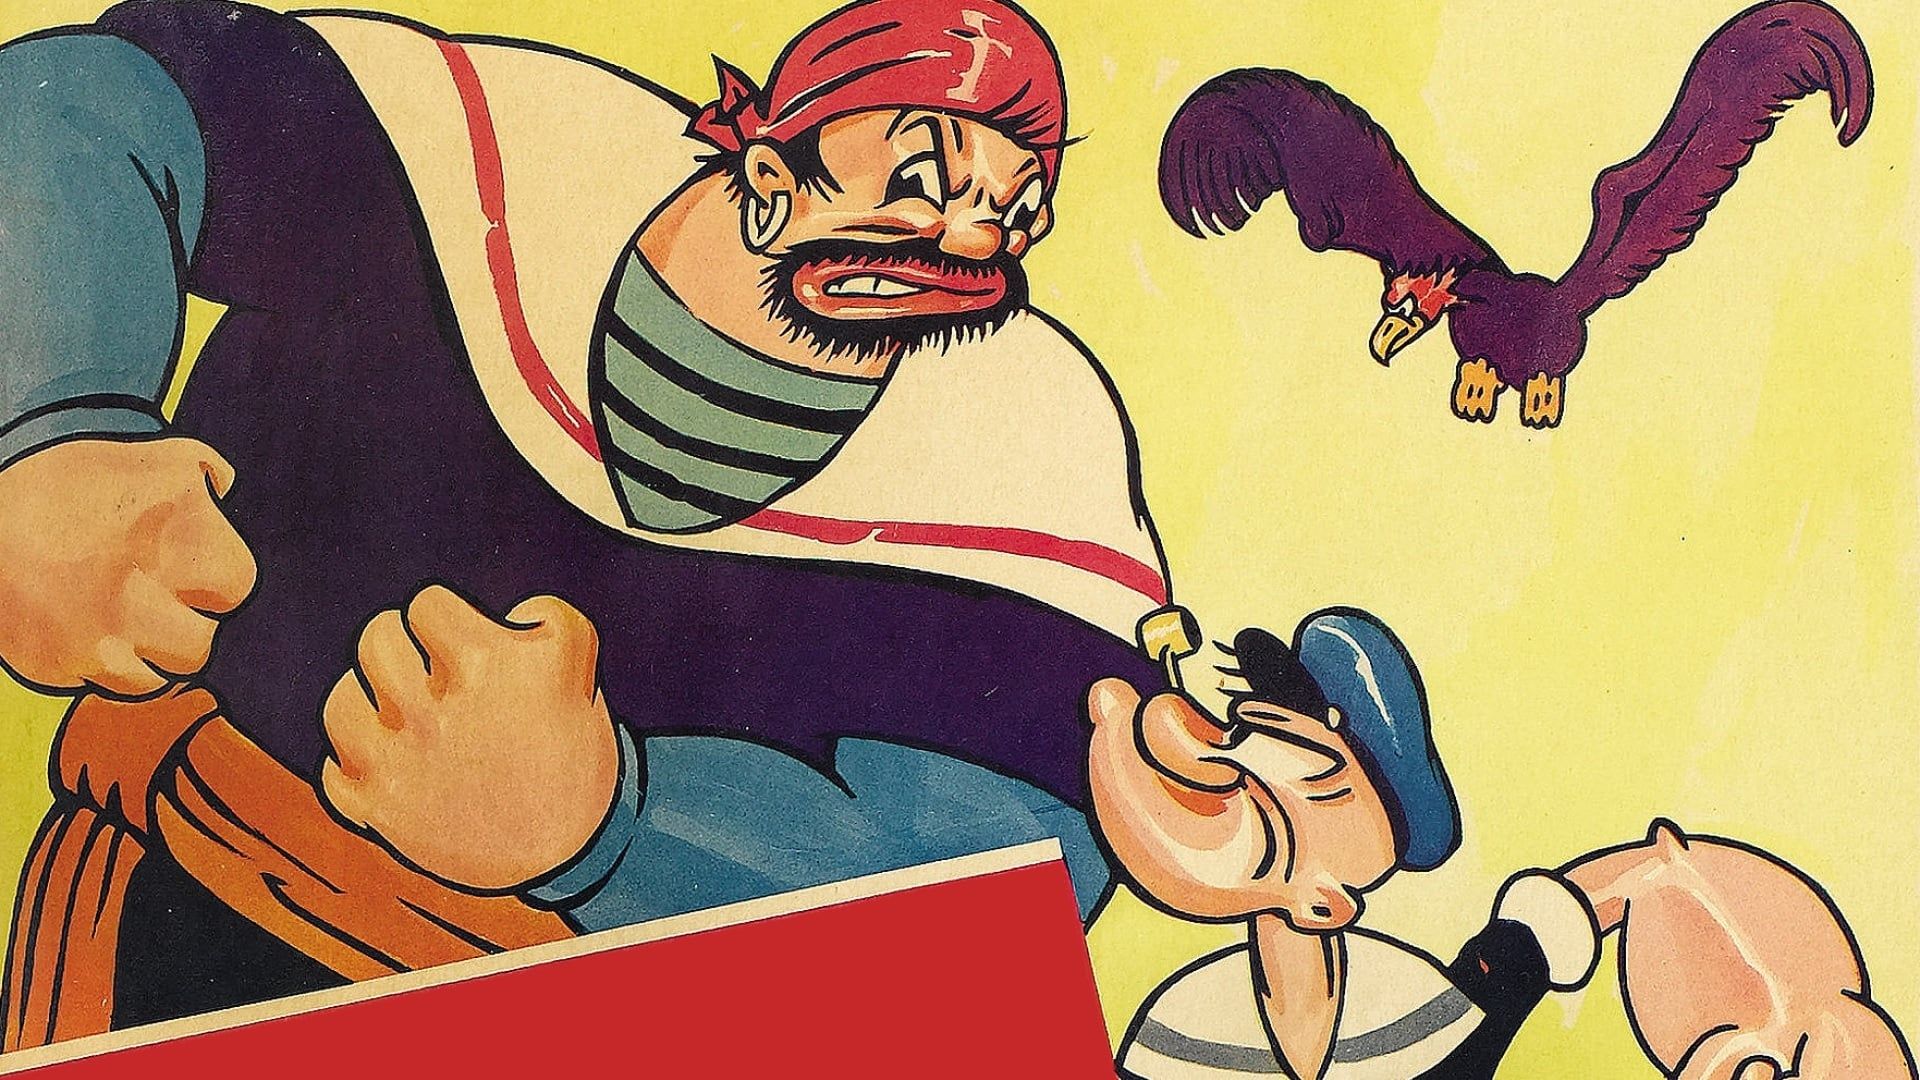 Popeye the Sailor Meets Sindbad the Sailor background